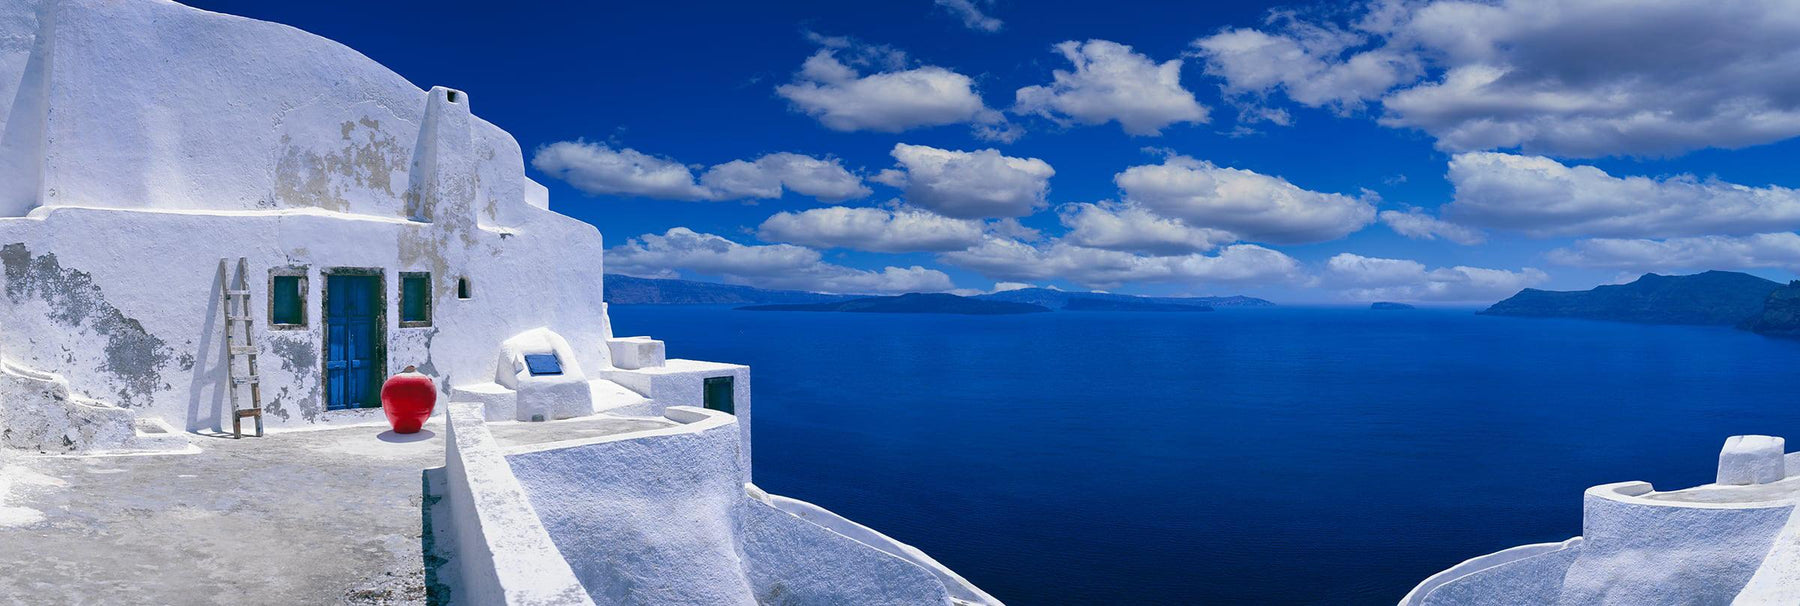 White plastered house and courtyard overlooking the blue ocean and cloudy skies of Santorini Greece